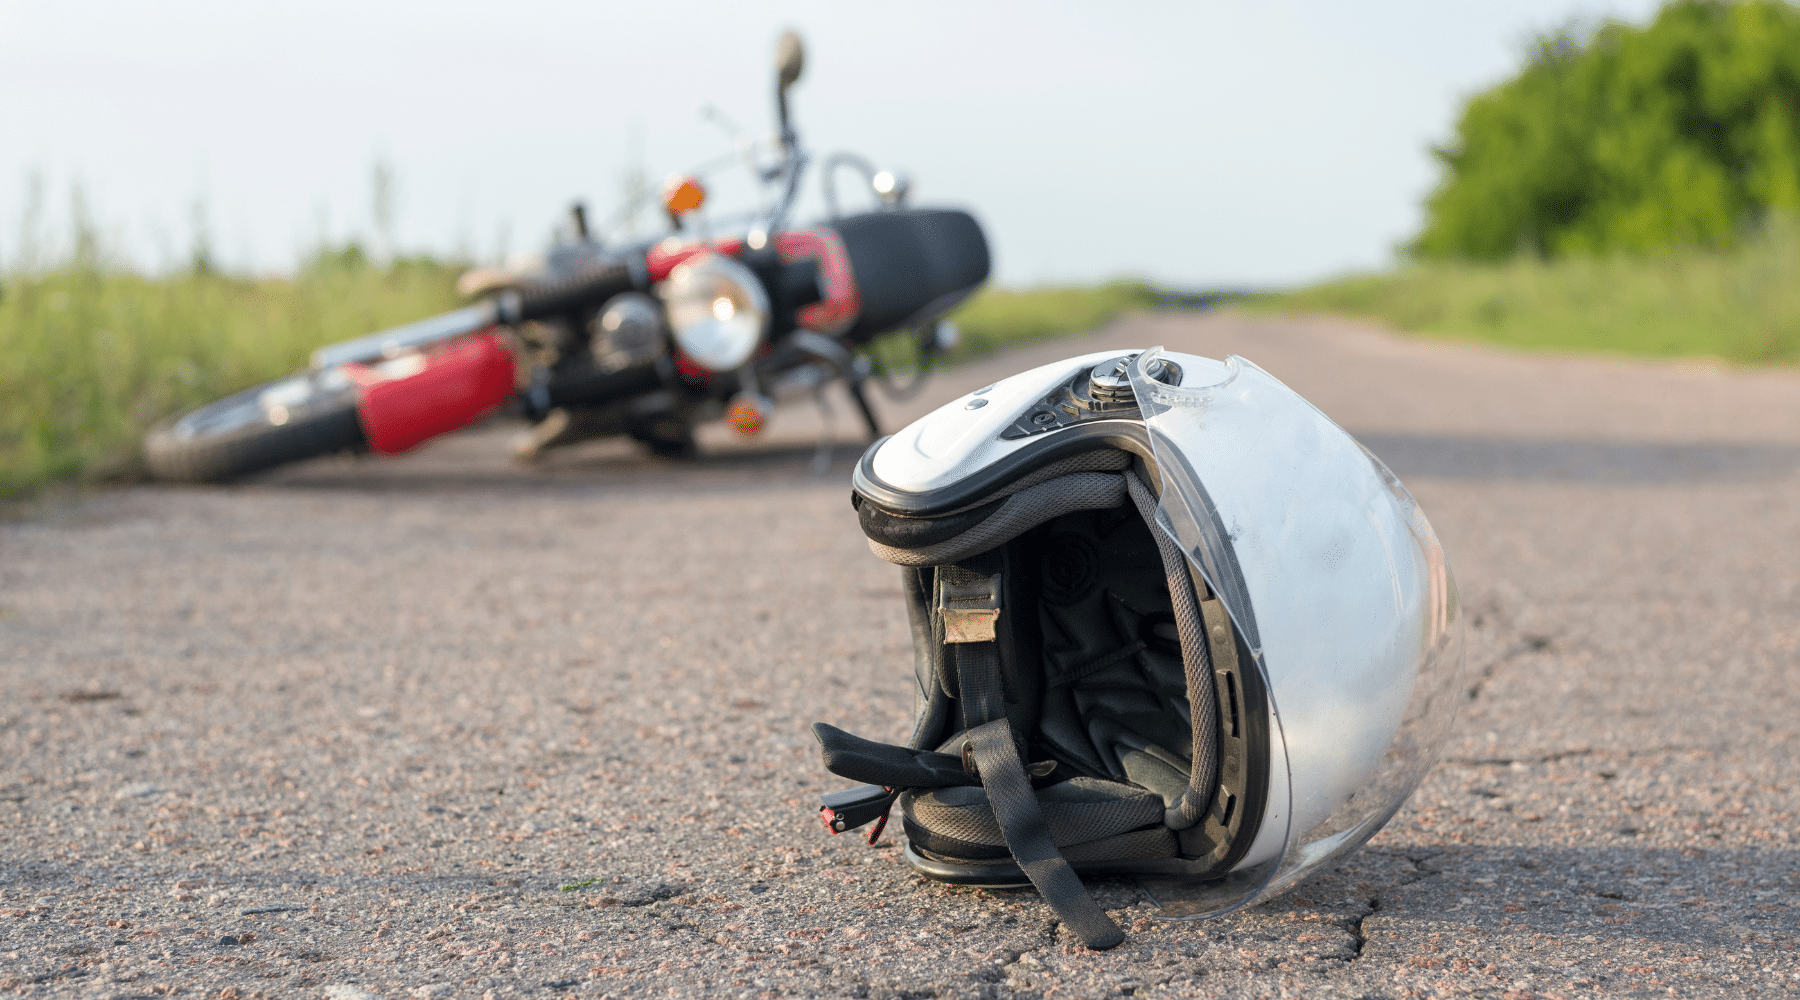 Riders Beware:  Leading Causes of Motorcycle Accidents in California